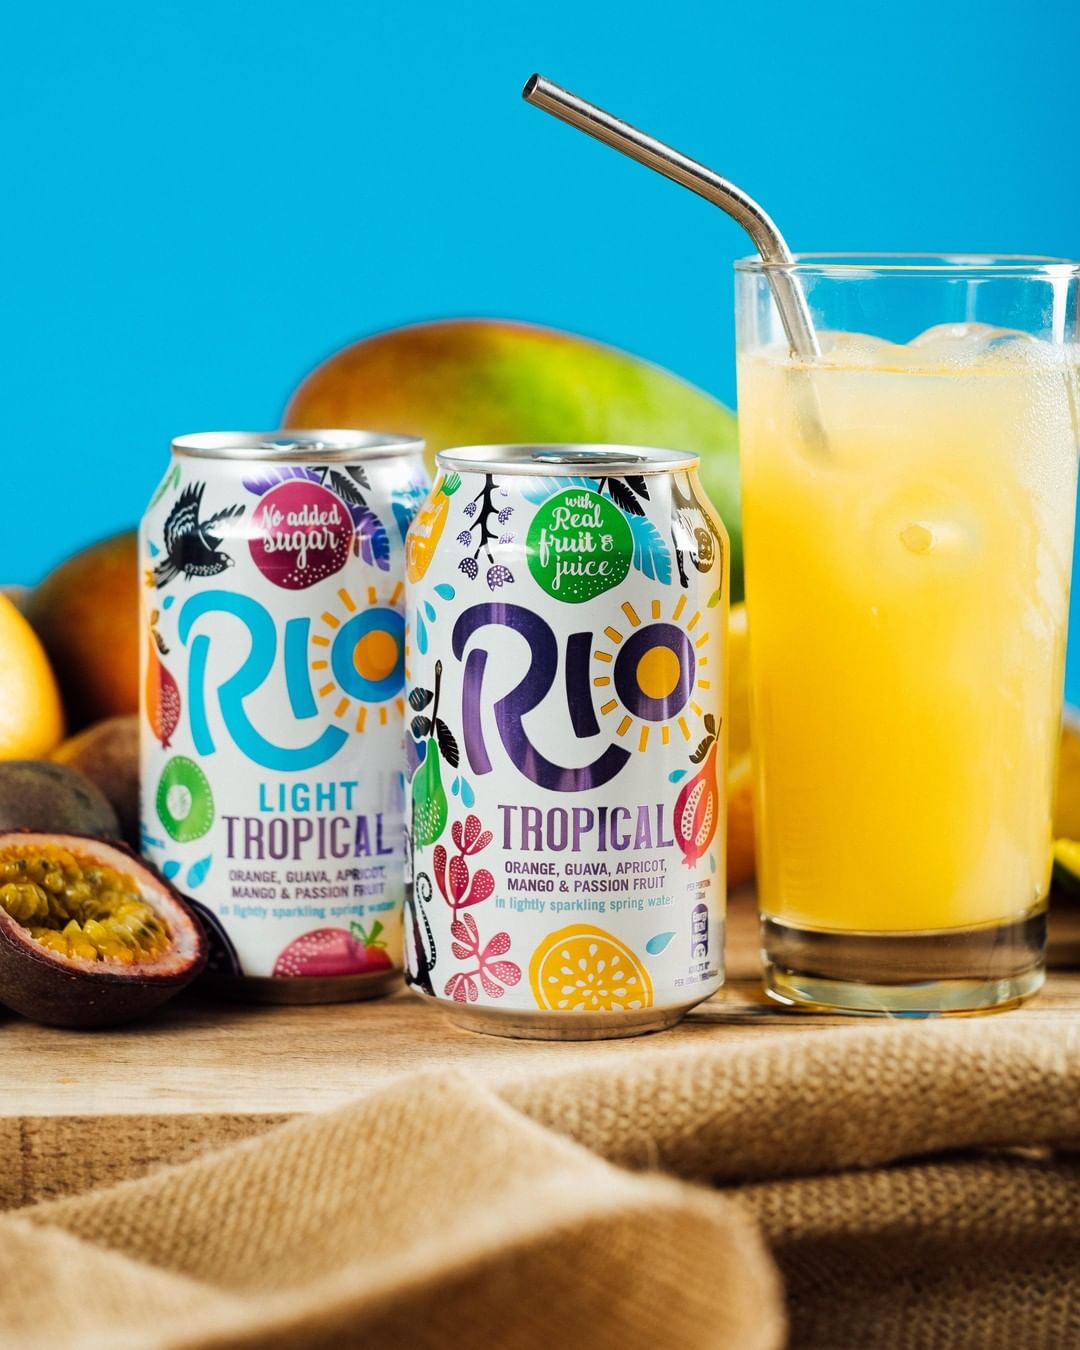 Boost Drinks secures distribution rights for soft drink Rio